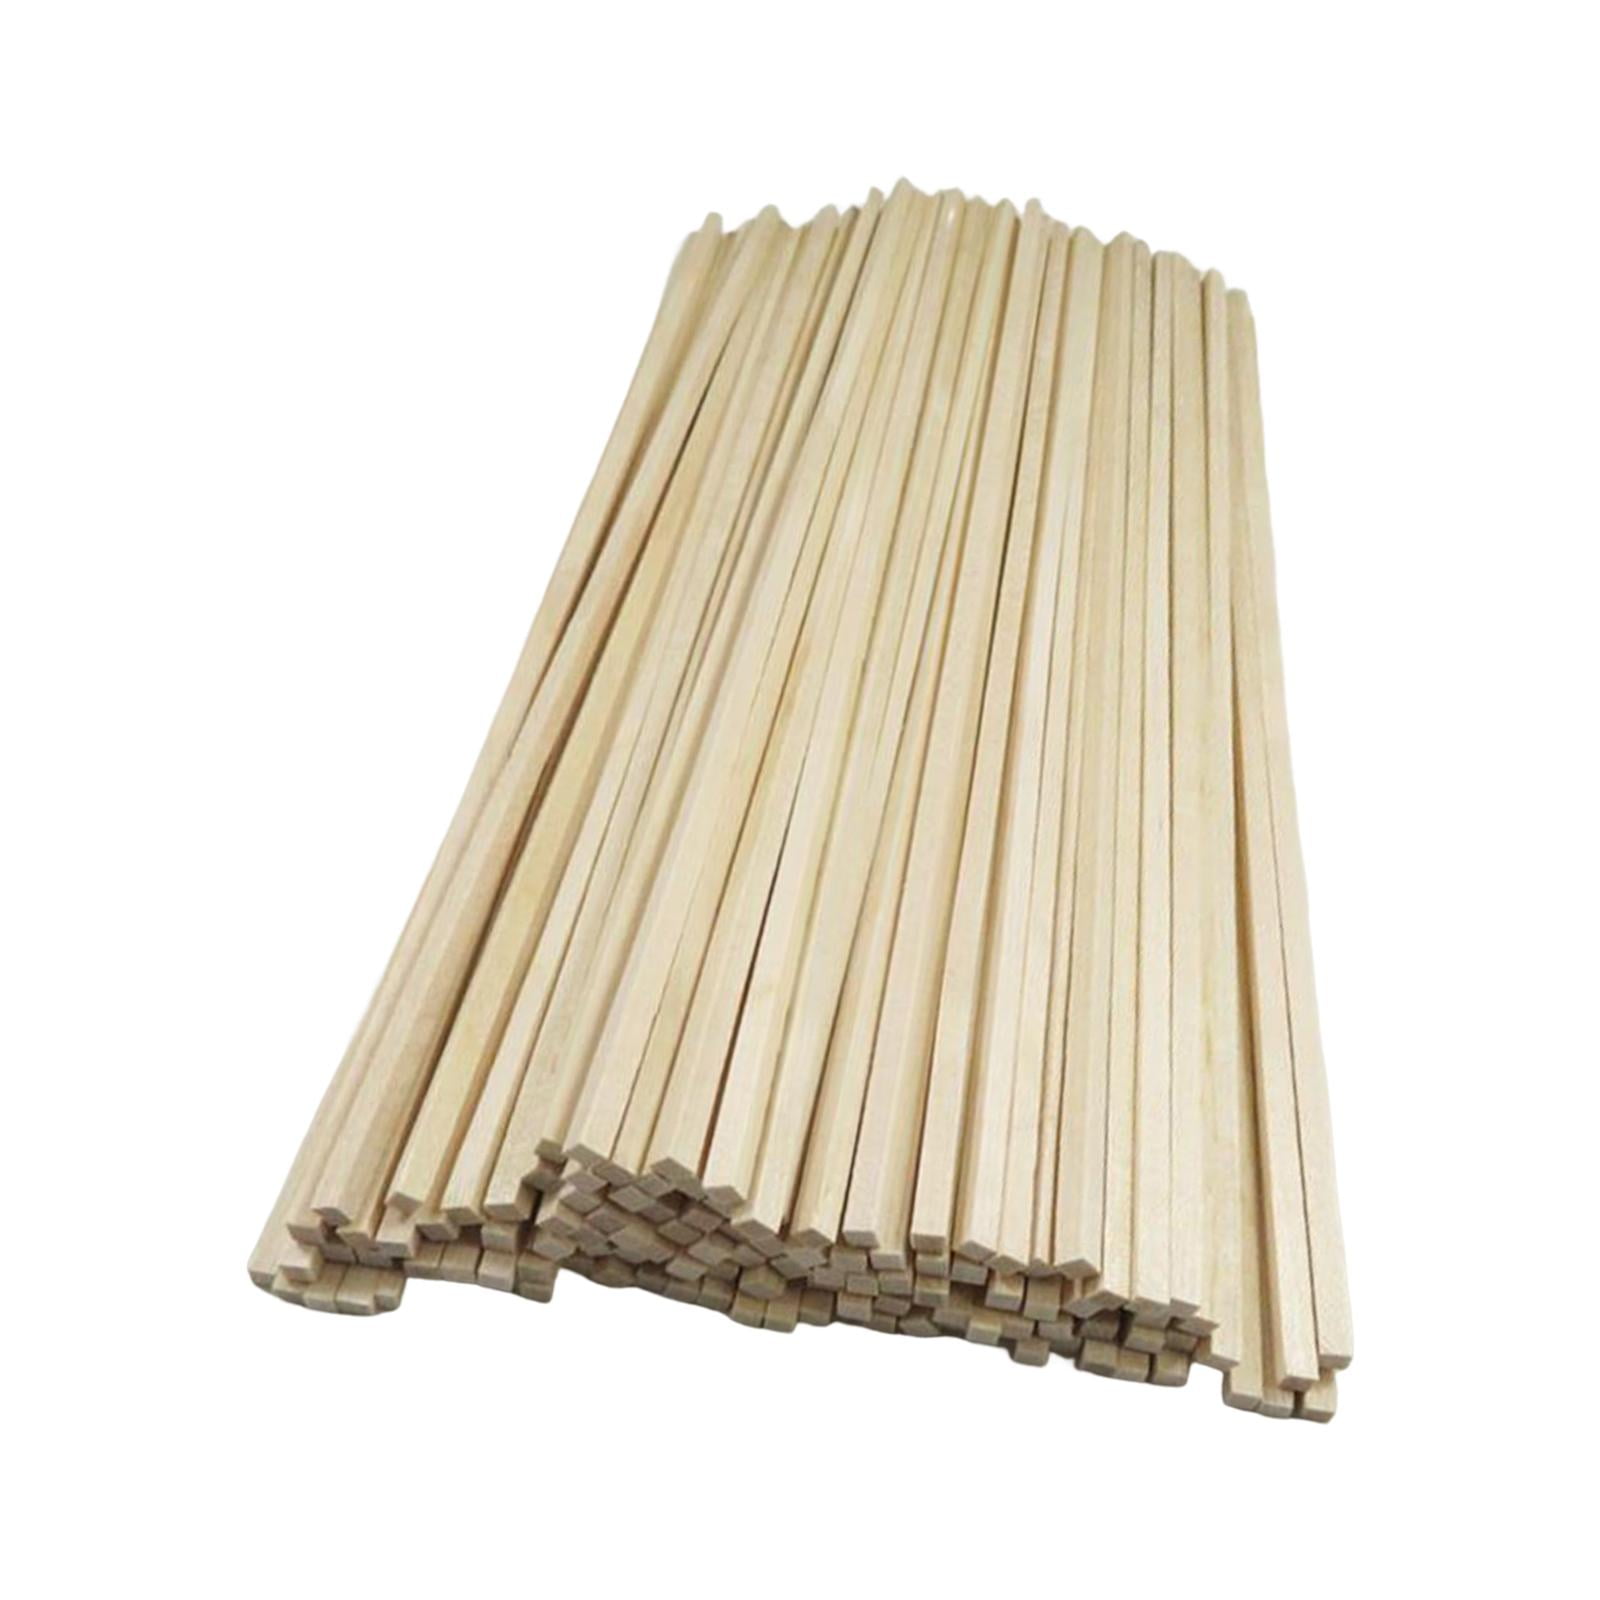  TEHAUX 50pcs Small Wooden Strip Hardwood Square dowels Wood  Dowel rods Unfinished Dowel Sticks for Crafts Wood Dowel Sticks Coffee  Accessories Wooden Crafts DIY Accessory Natural Drinks